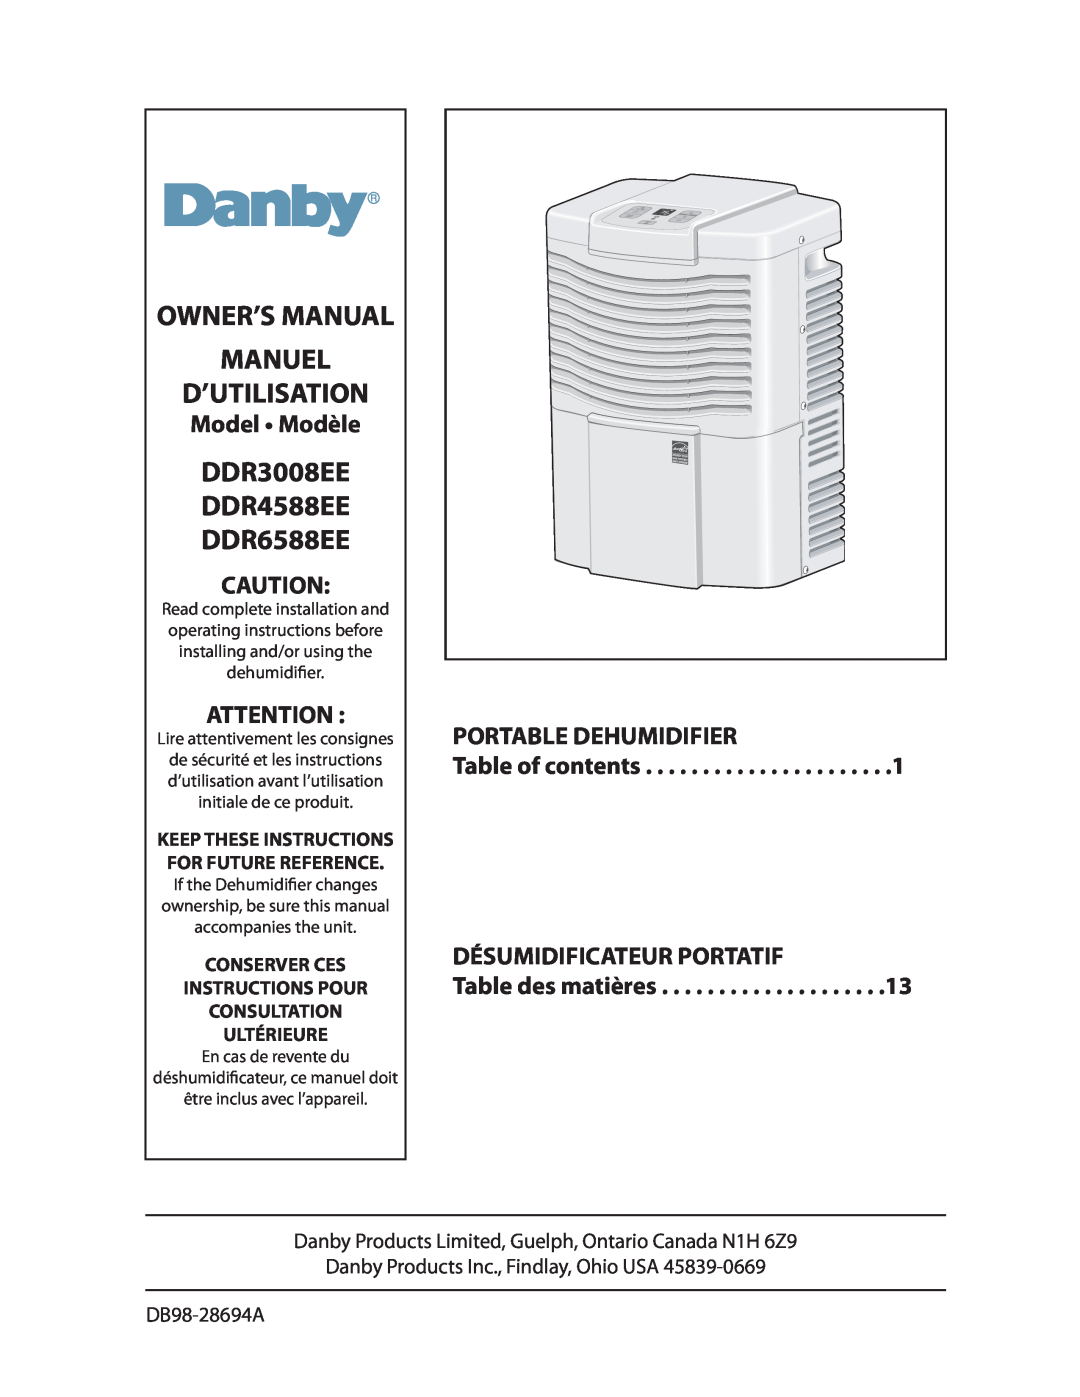 Danby owner manual Danby Products Limited, Guelph, Ontario Canada N1H 6Z9, DDR3008EE DDR4588EE DDR6588EE, Model Modèle 